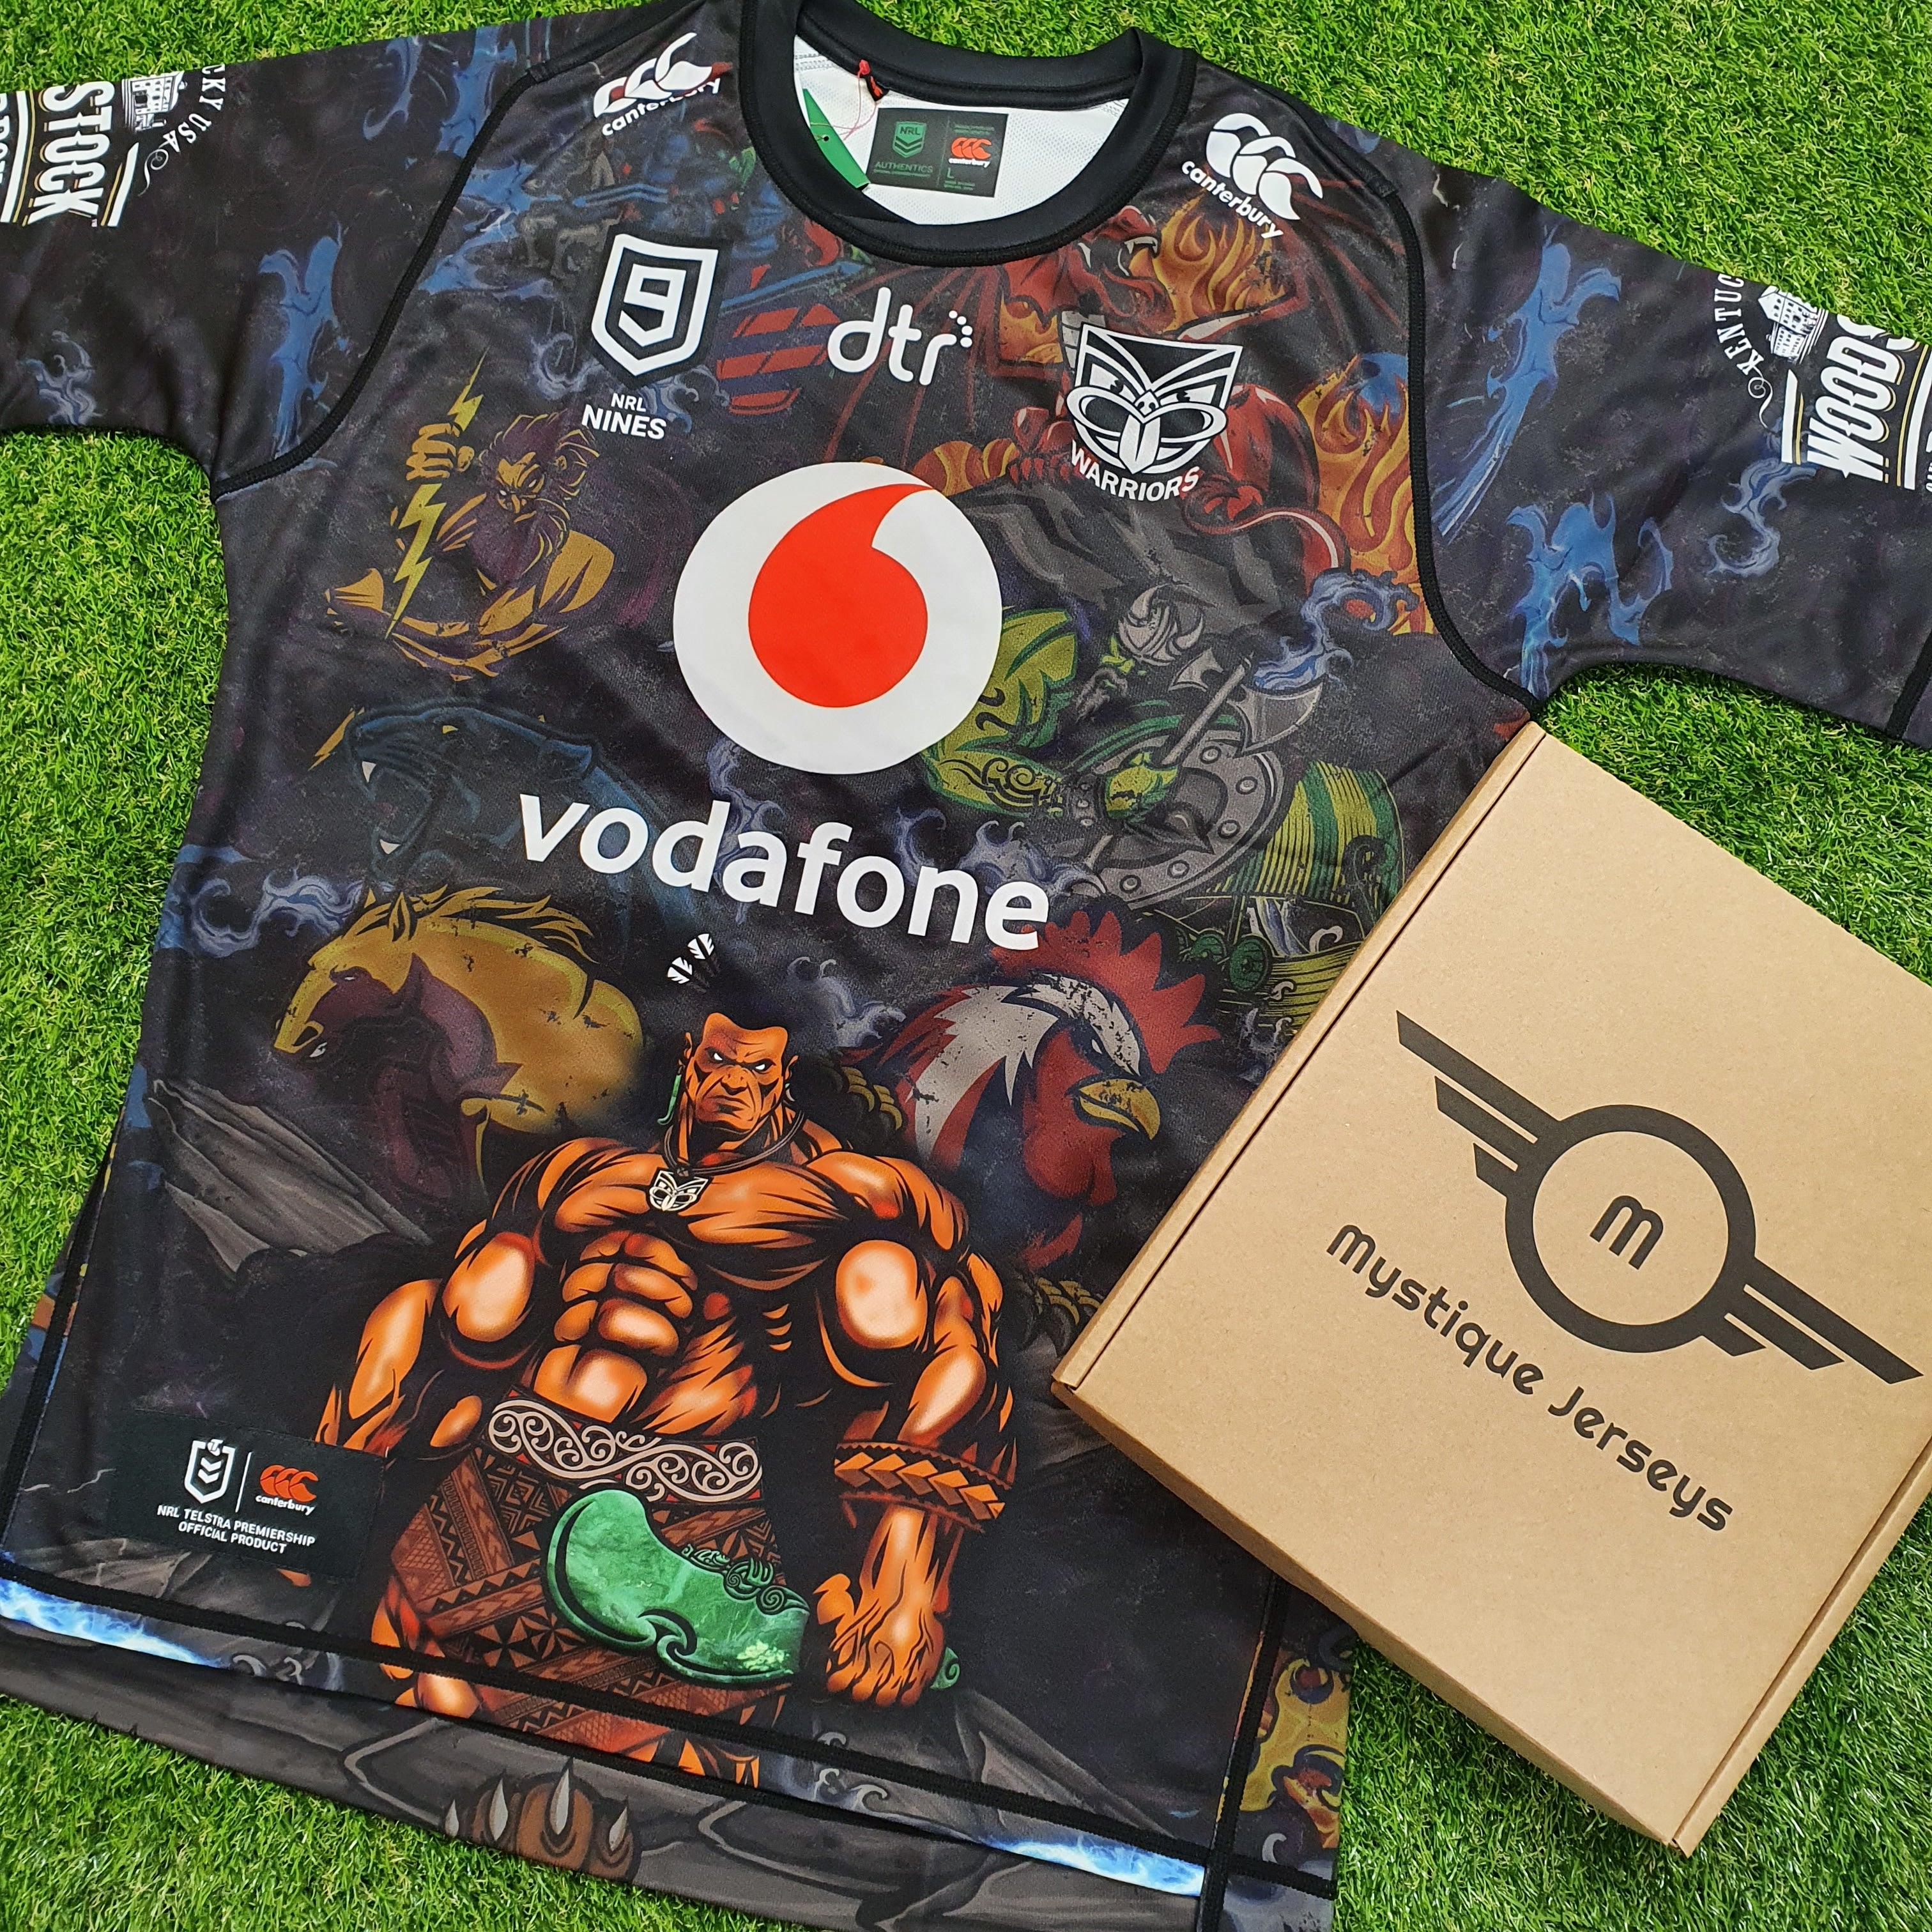 Unwrap a sense of anticipation with our Mystery Rugby Shirt Box! Each box promises a surprise rugby shirt, adding an element of excitement to your collection. Perfect for rugby fans seeking a unique addition to their wardrobe.